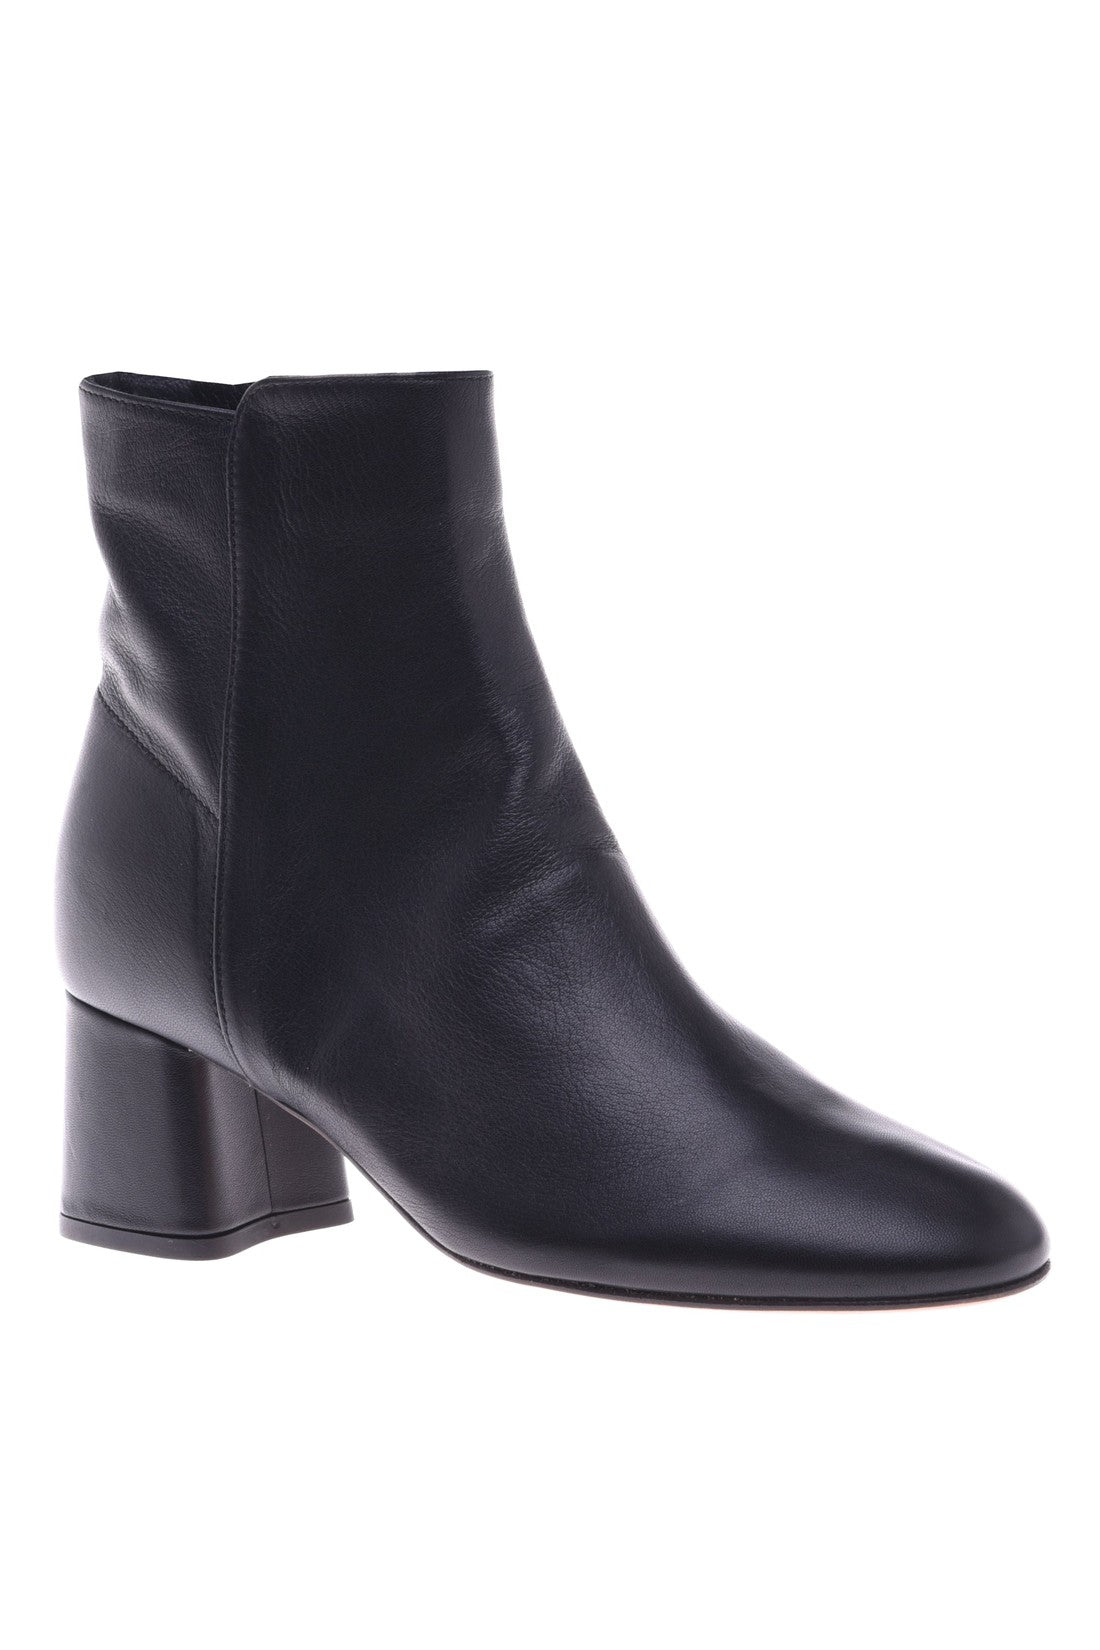 Ankle boot in black nappa leather